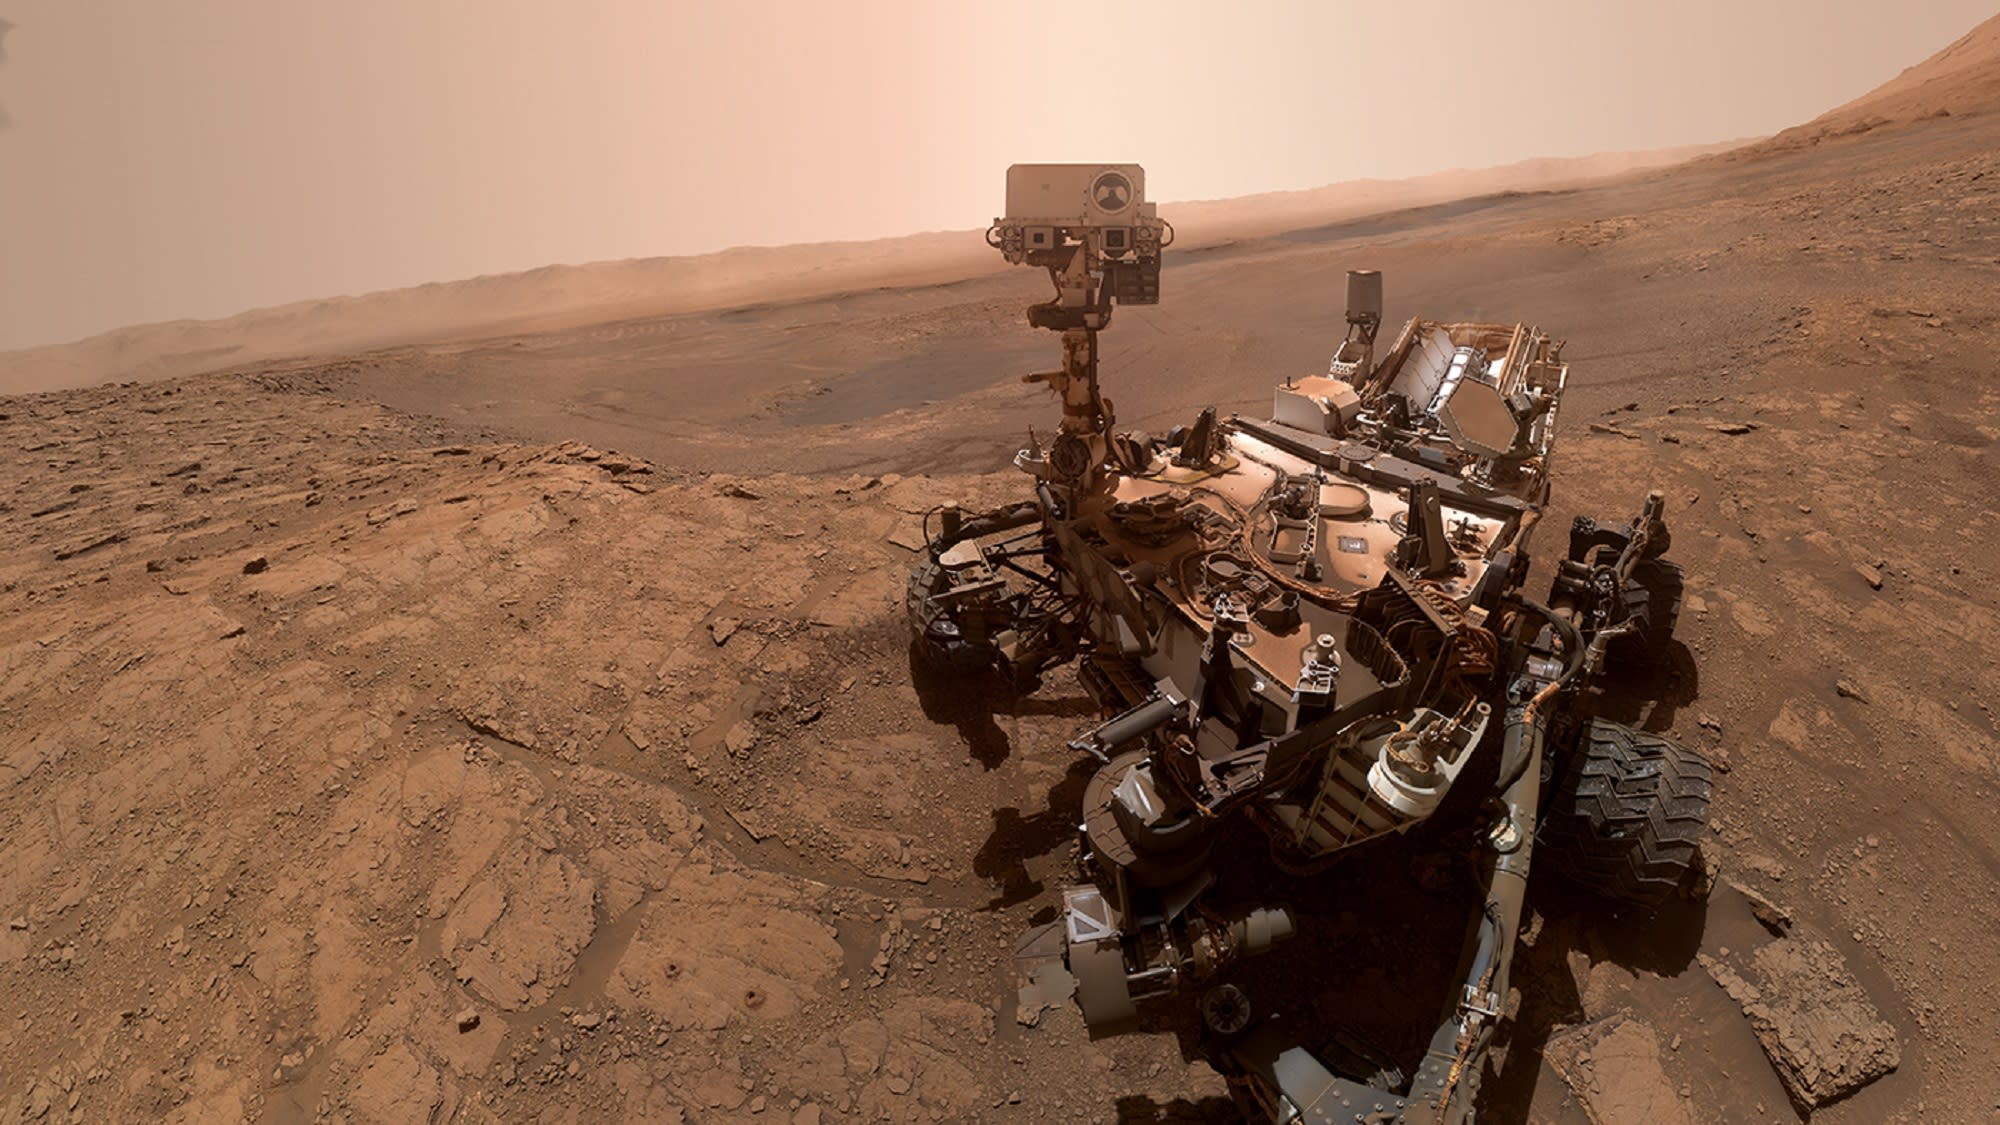 NASA team is controlling the Mars Curiosity rover from home — take a look at their work from home setups